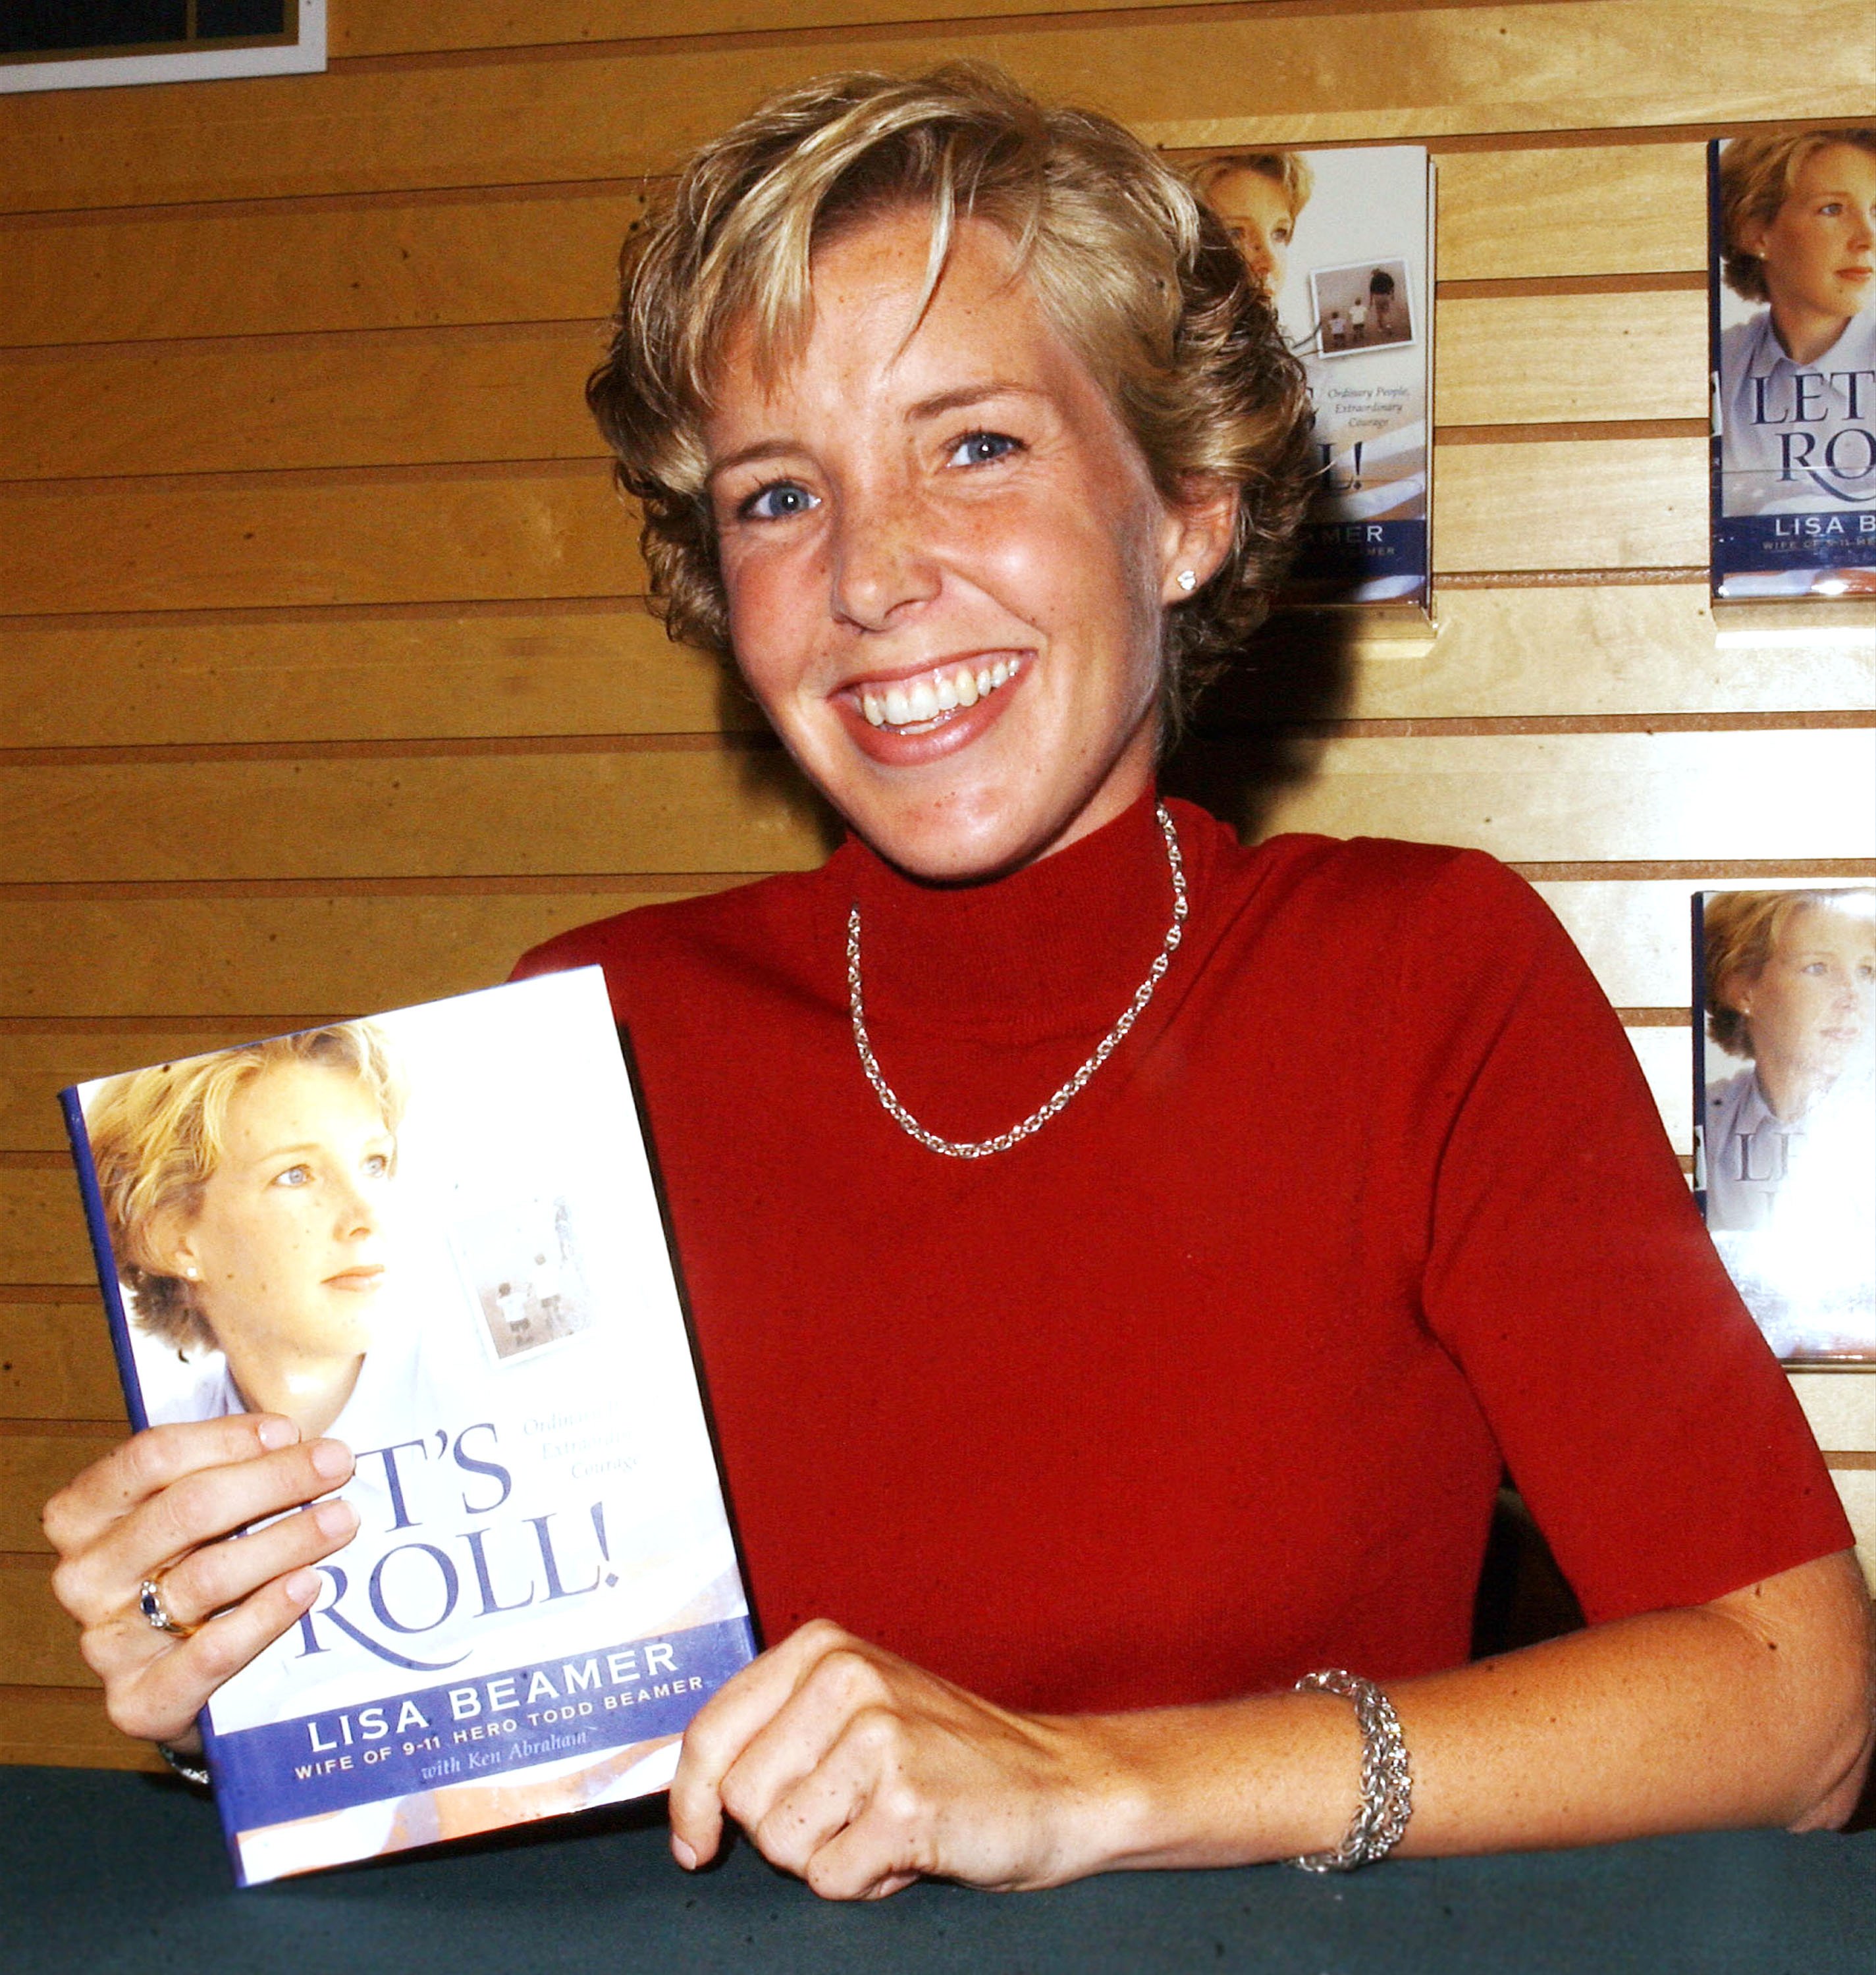 Lisa Beamer posing with a copy of her book "Let's Roll! Ordinary People, Extraordinary Courage" on August 21, 2002, in Los Angeles | Source: Getty Images